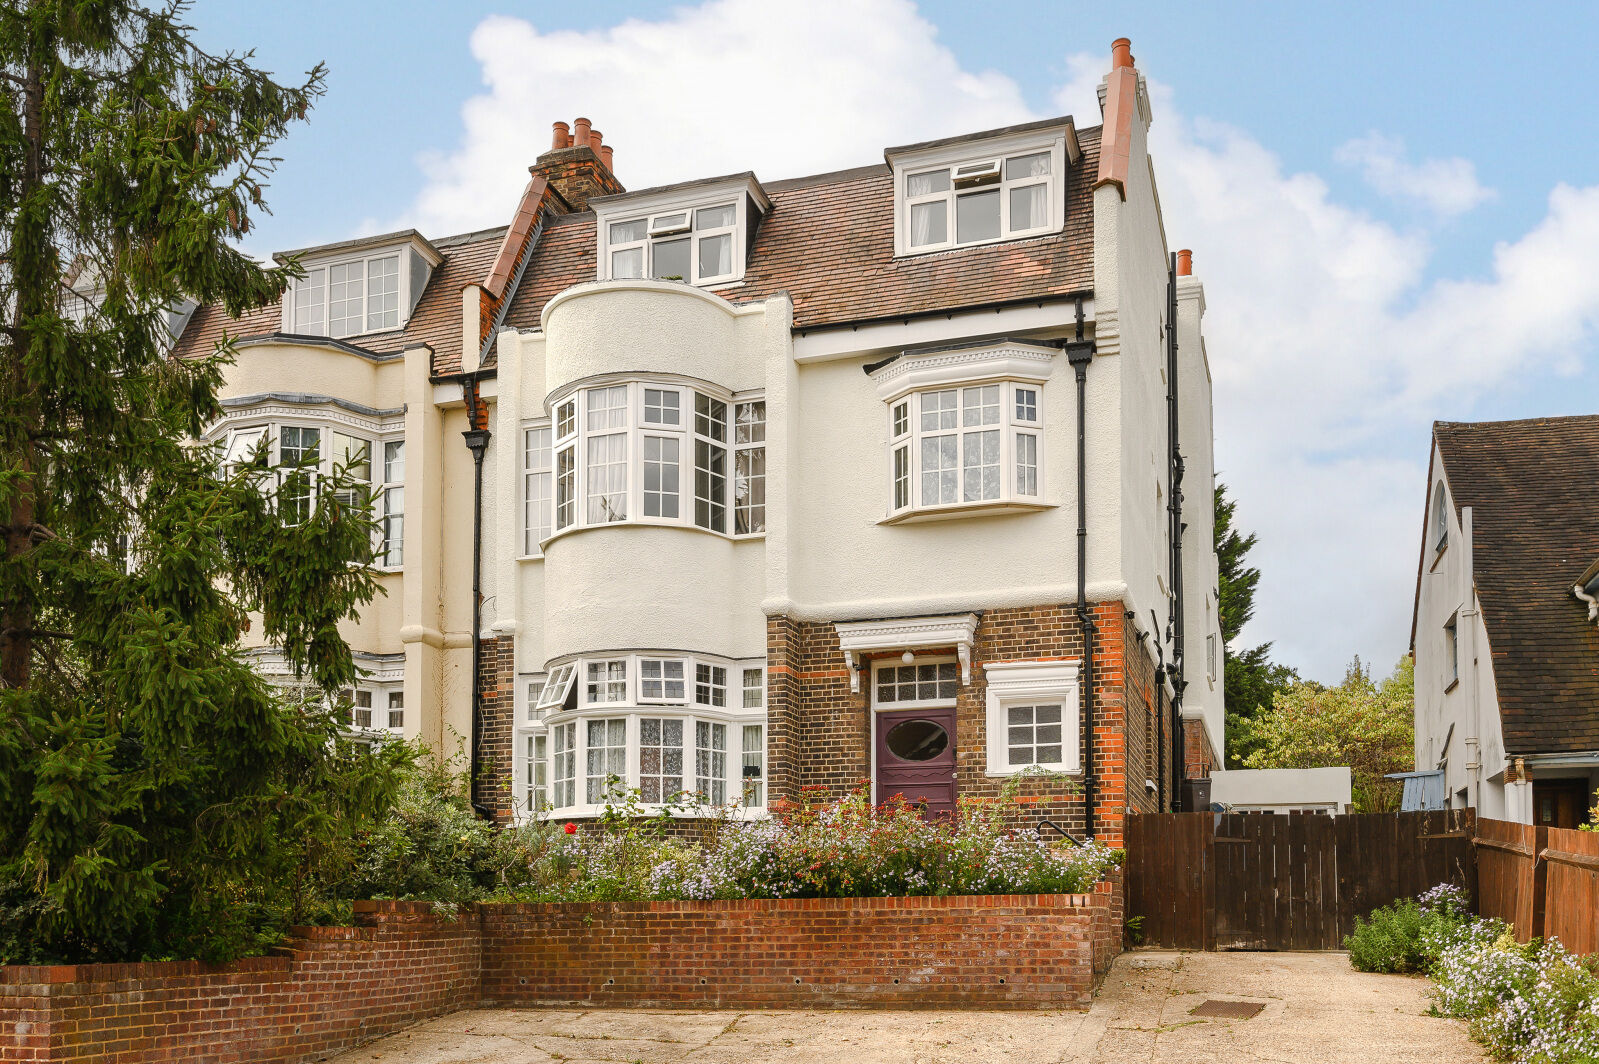 6 bedroom semi detached house for sale Vineyard Hill Road, London, SW19, main image